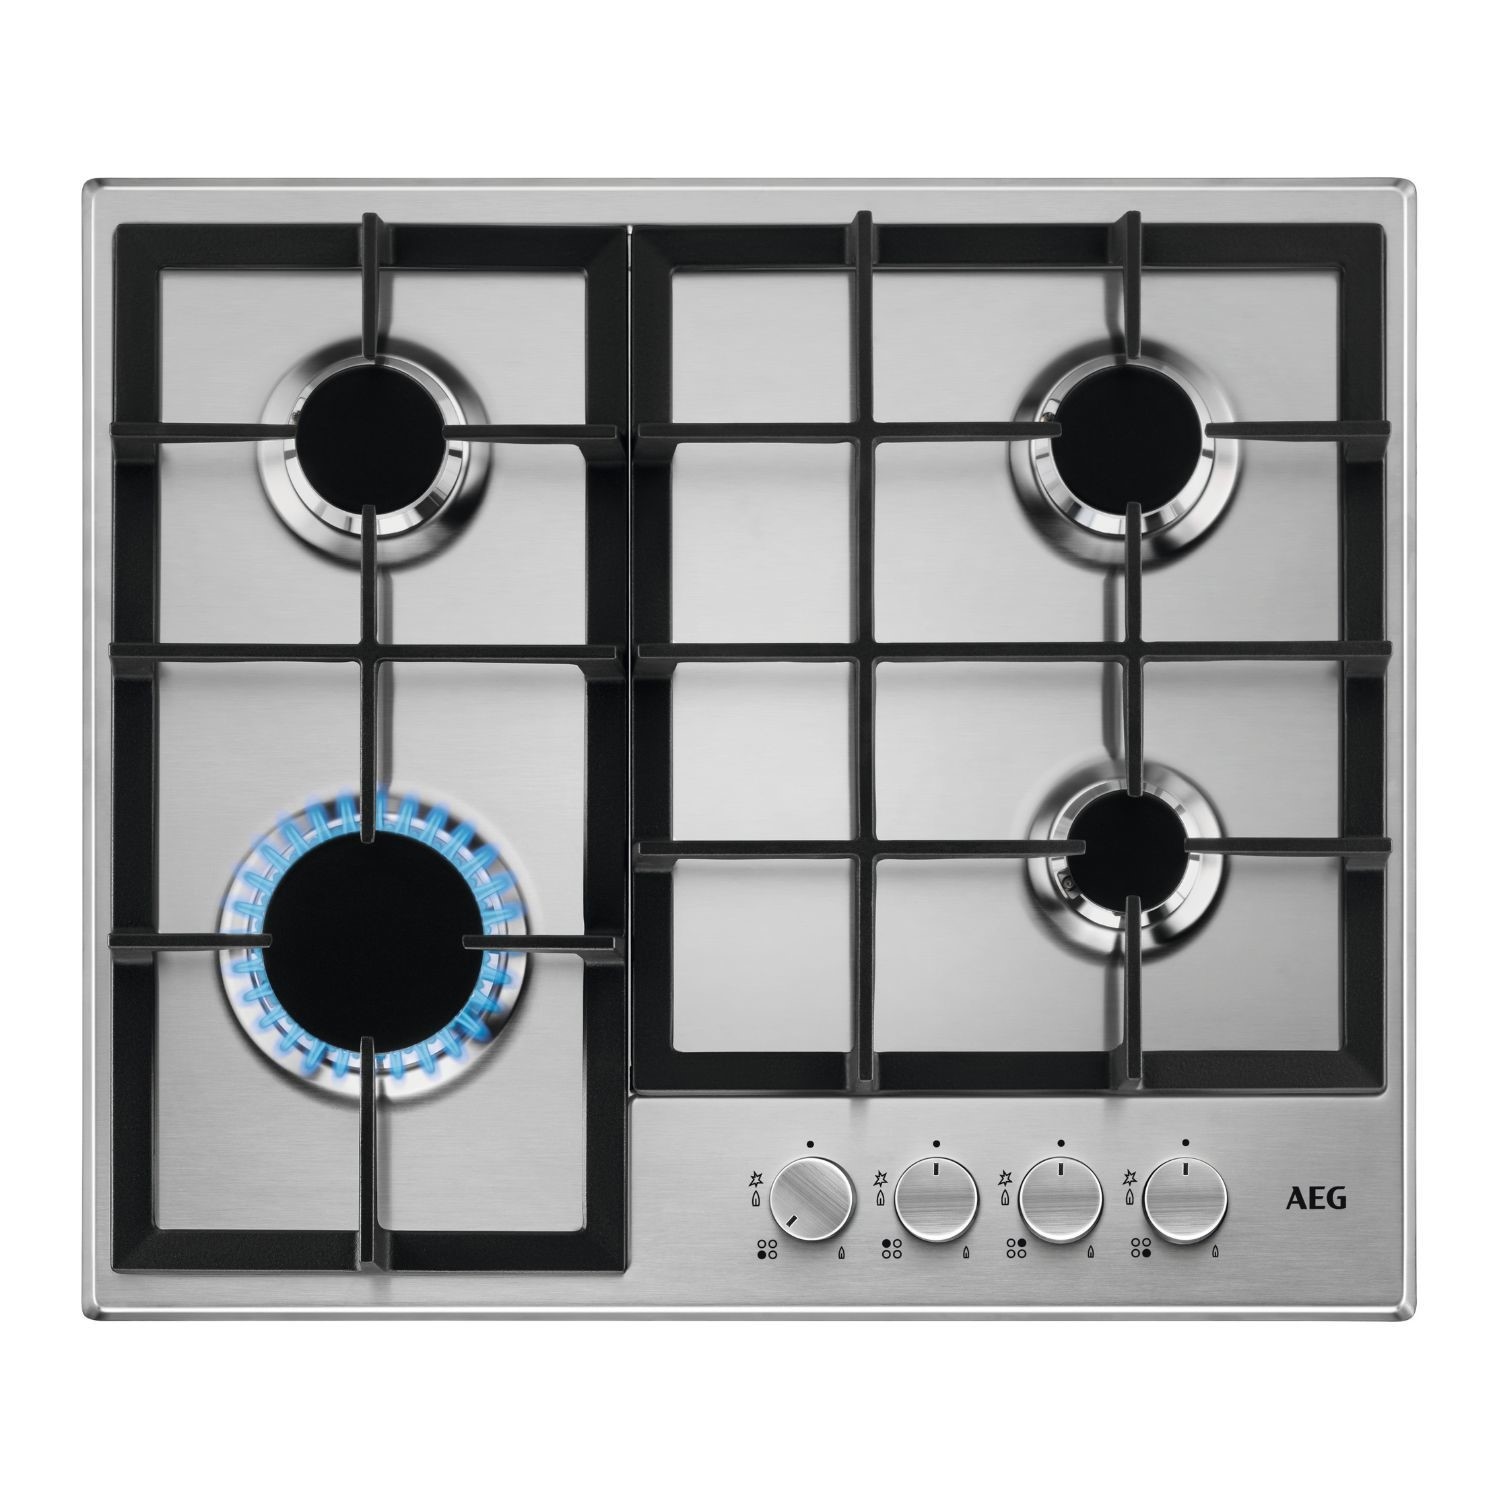 Photos - Other for Computer AEG 3000 Series 60cm 4 Burner Gas Hob with Wok Burner -Stainless Steel 949 